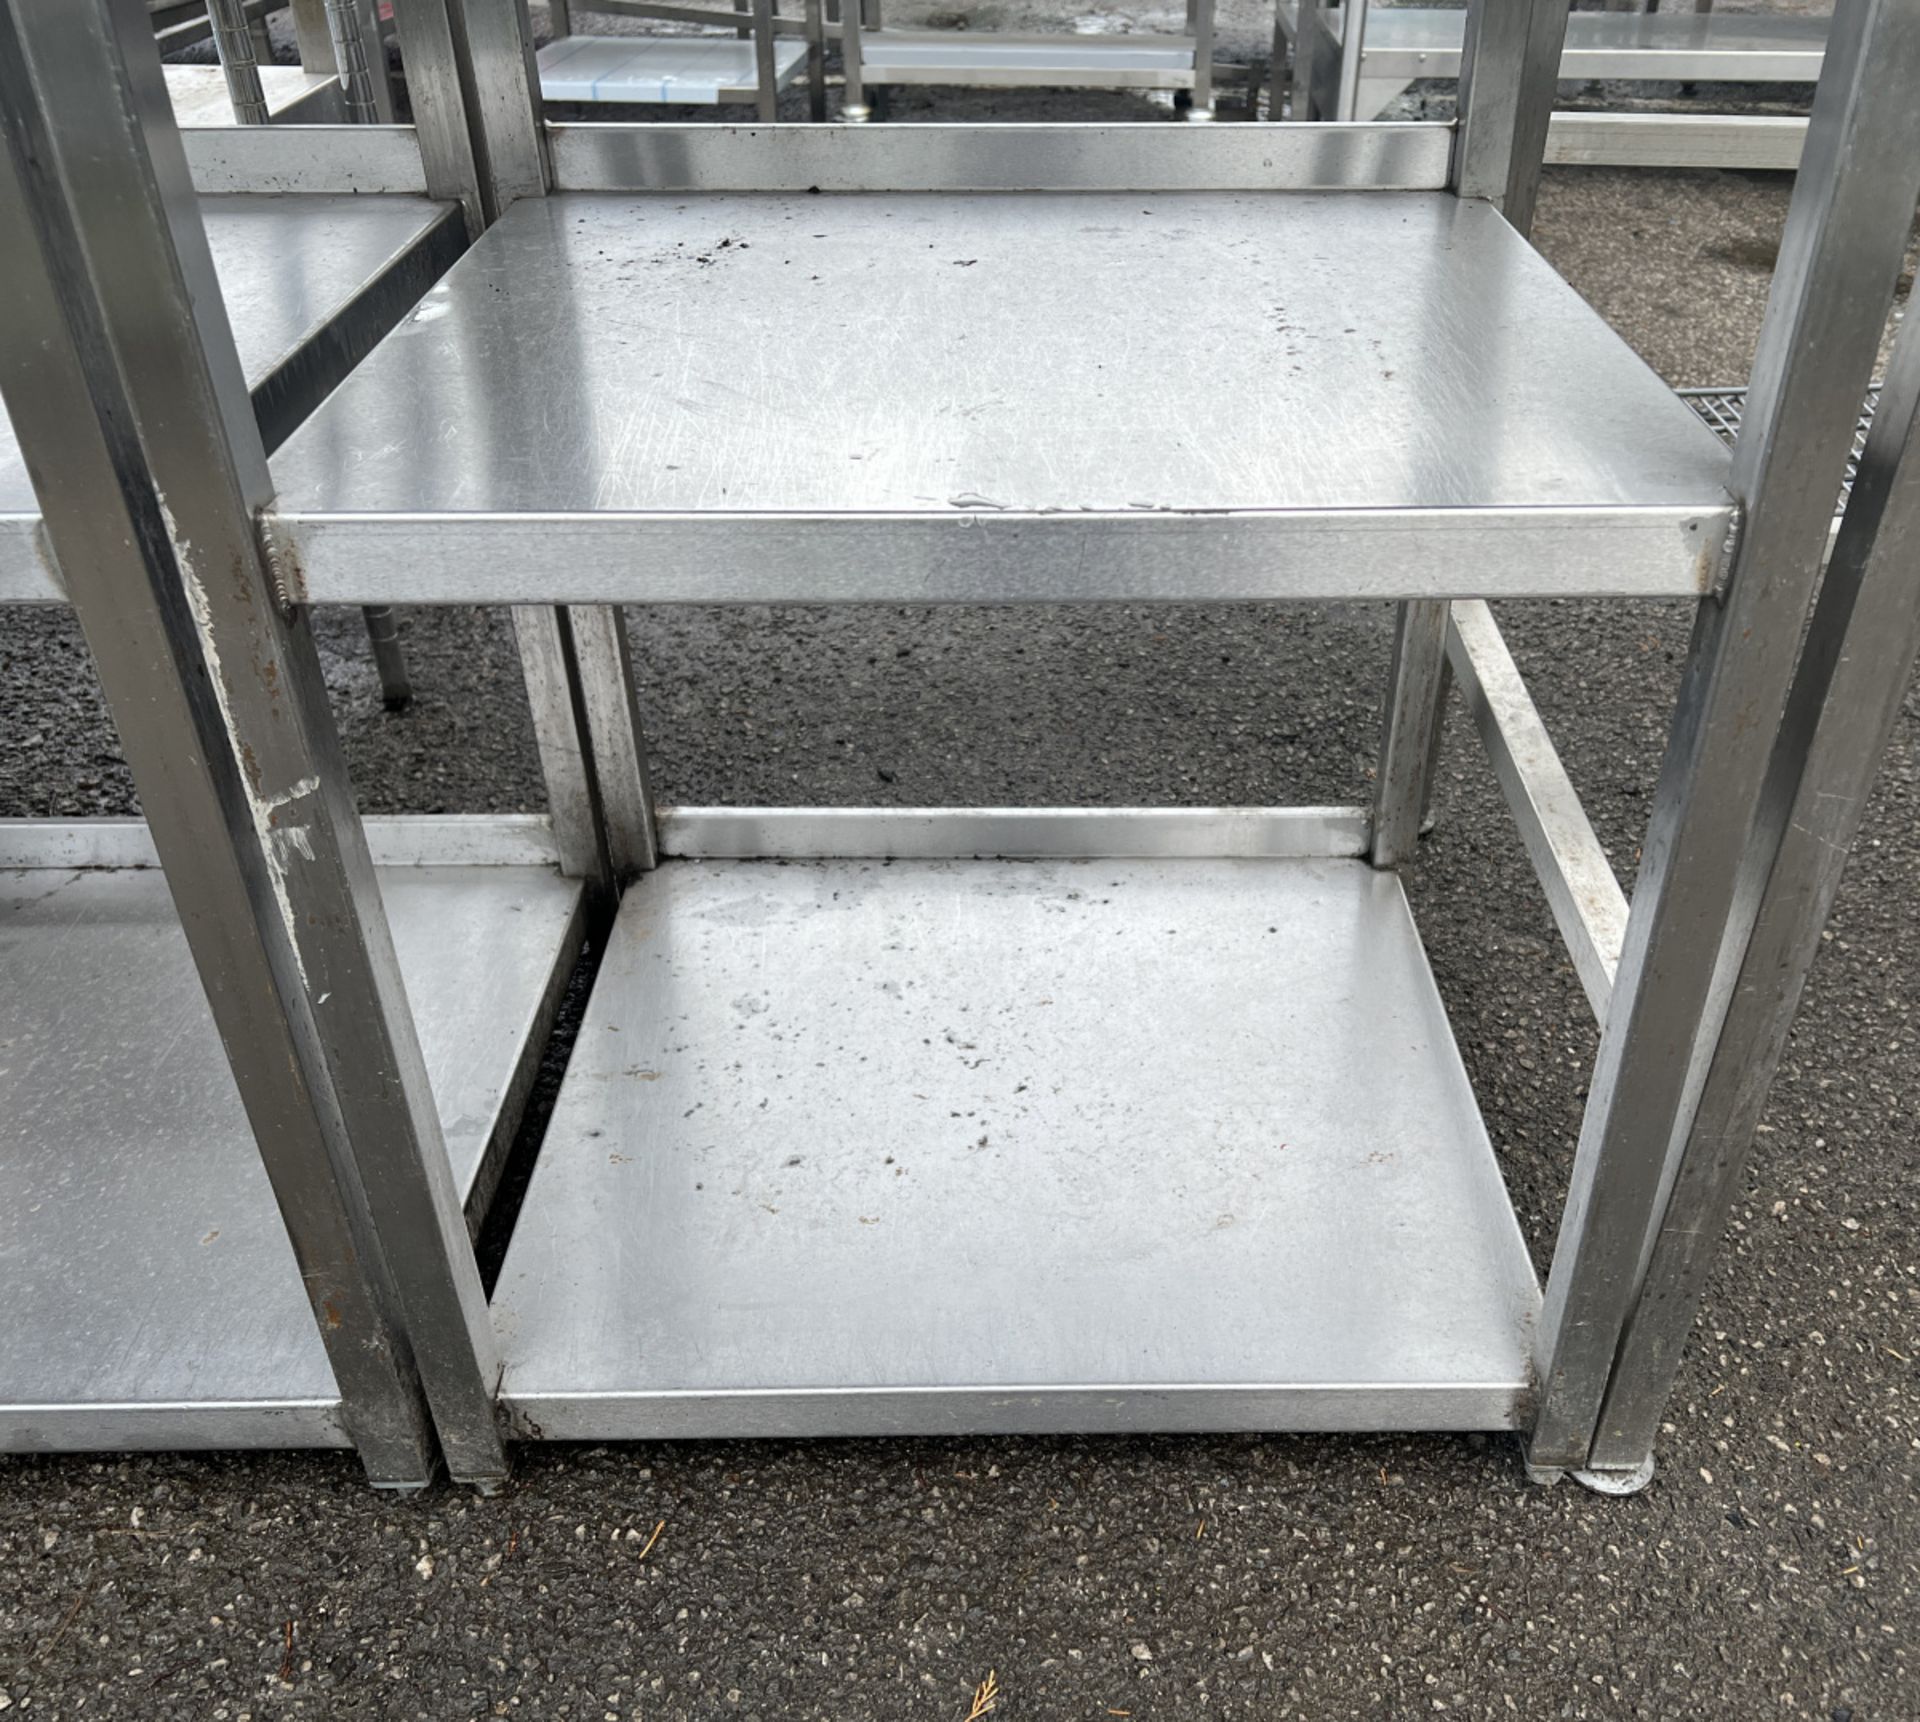 Stainless steel draining table with 2 bottom shelves - dimensions: 60 x 65 x 95cm - Image 3 of 3